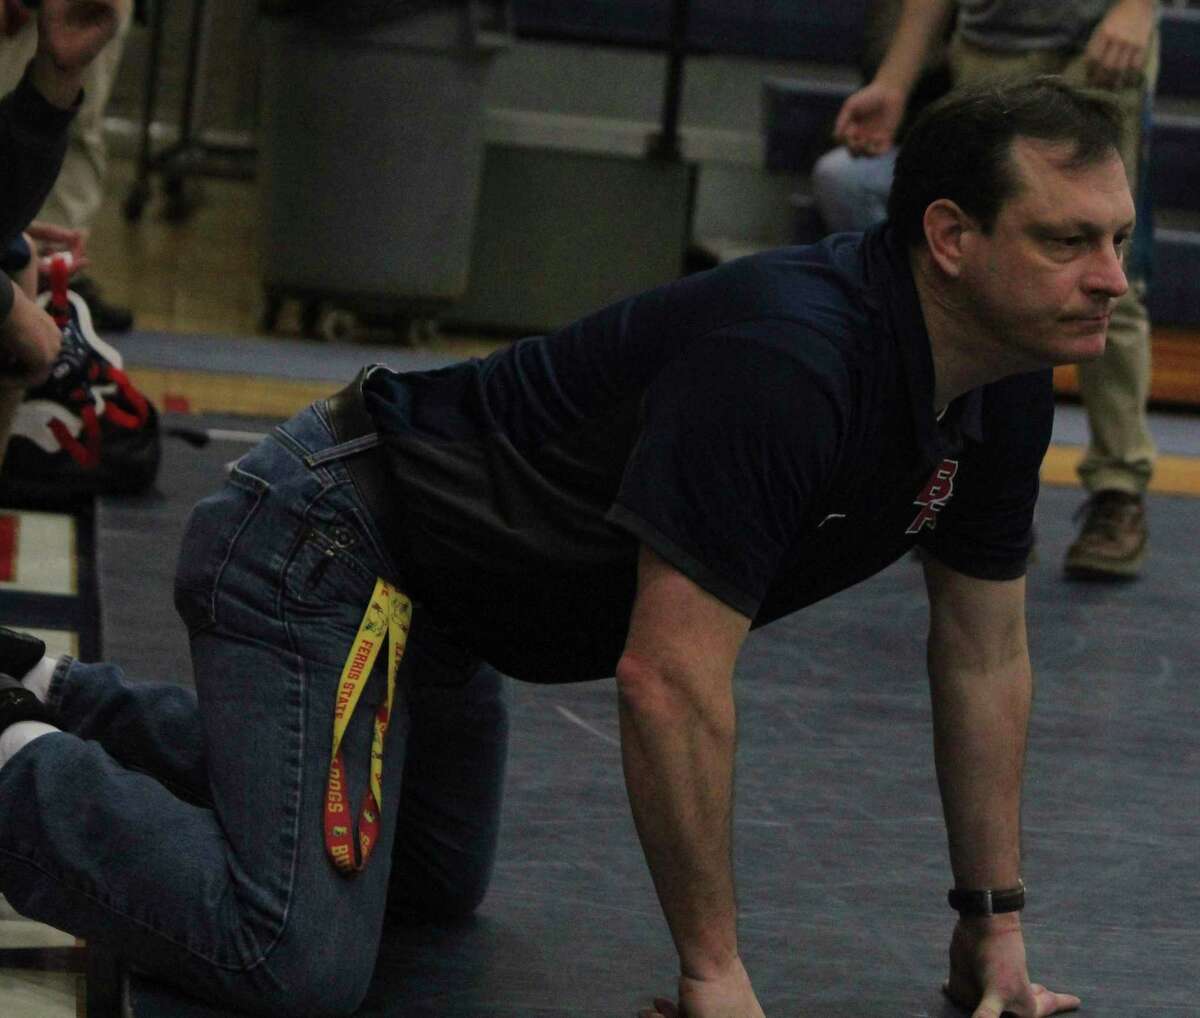 Big Rapids coach Bruce Hoffman will be putting his wrestling team up against competition this week. (Pioneer file photo)